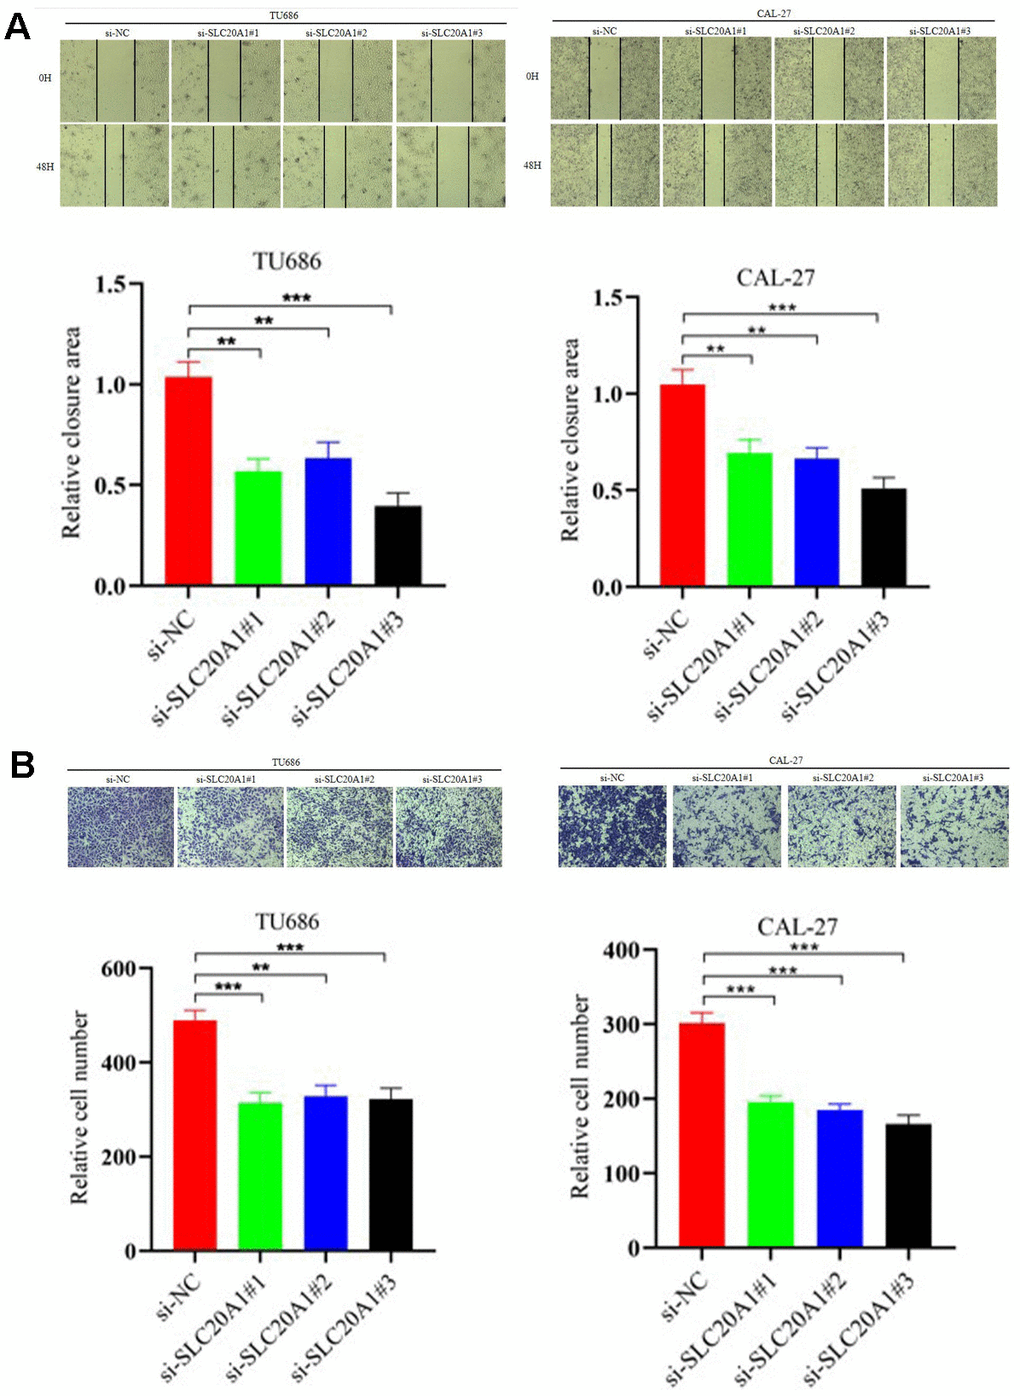 Silencing SLC20A1 inhibited migration and invasion in HNSCC. (A) Wound-healing experiments showed that silencing SLC20A1 inhibited cell migration. (B) Silencing SLC20A1 inhibited the ability to invade CAL-27 and TU686 cell lines. *, PPP